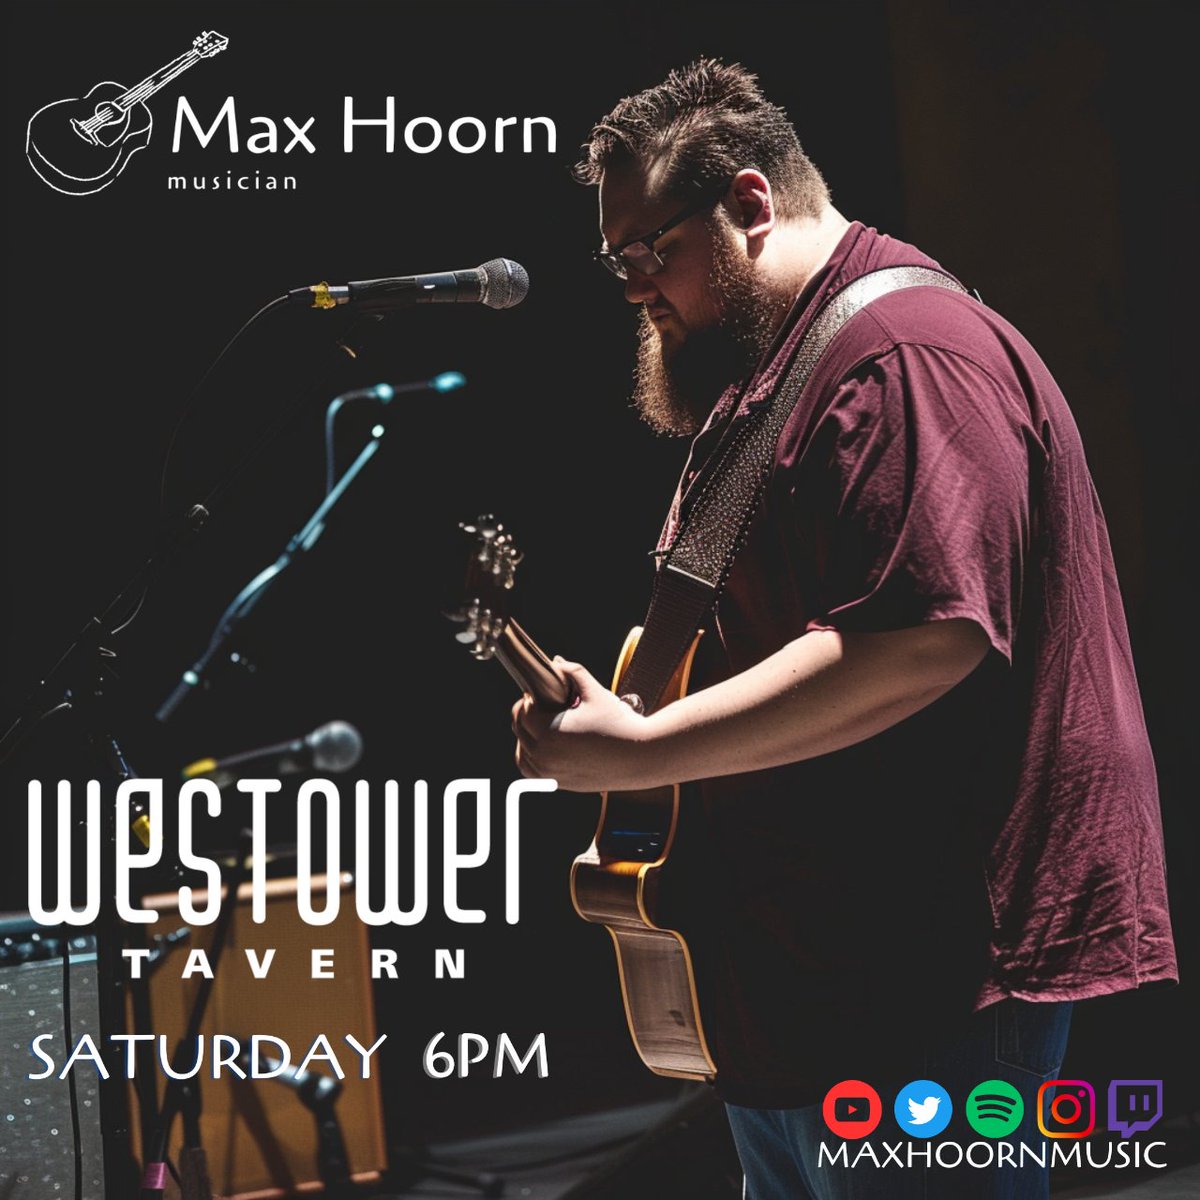 Playing at the Westower Tavern in Ballina this Saturday night from 6. 

#music #livemusic #loopy #matonguitars #qscaudio #qscaudio #maxhoorn #sennheiser #ballina #westowertavern #singersongwriter #guitarist #vorndao #supportlivemusic #music4life #acoustic #whatson #livelooping